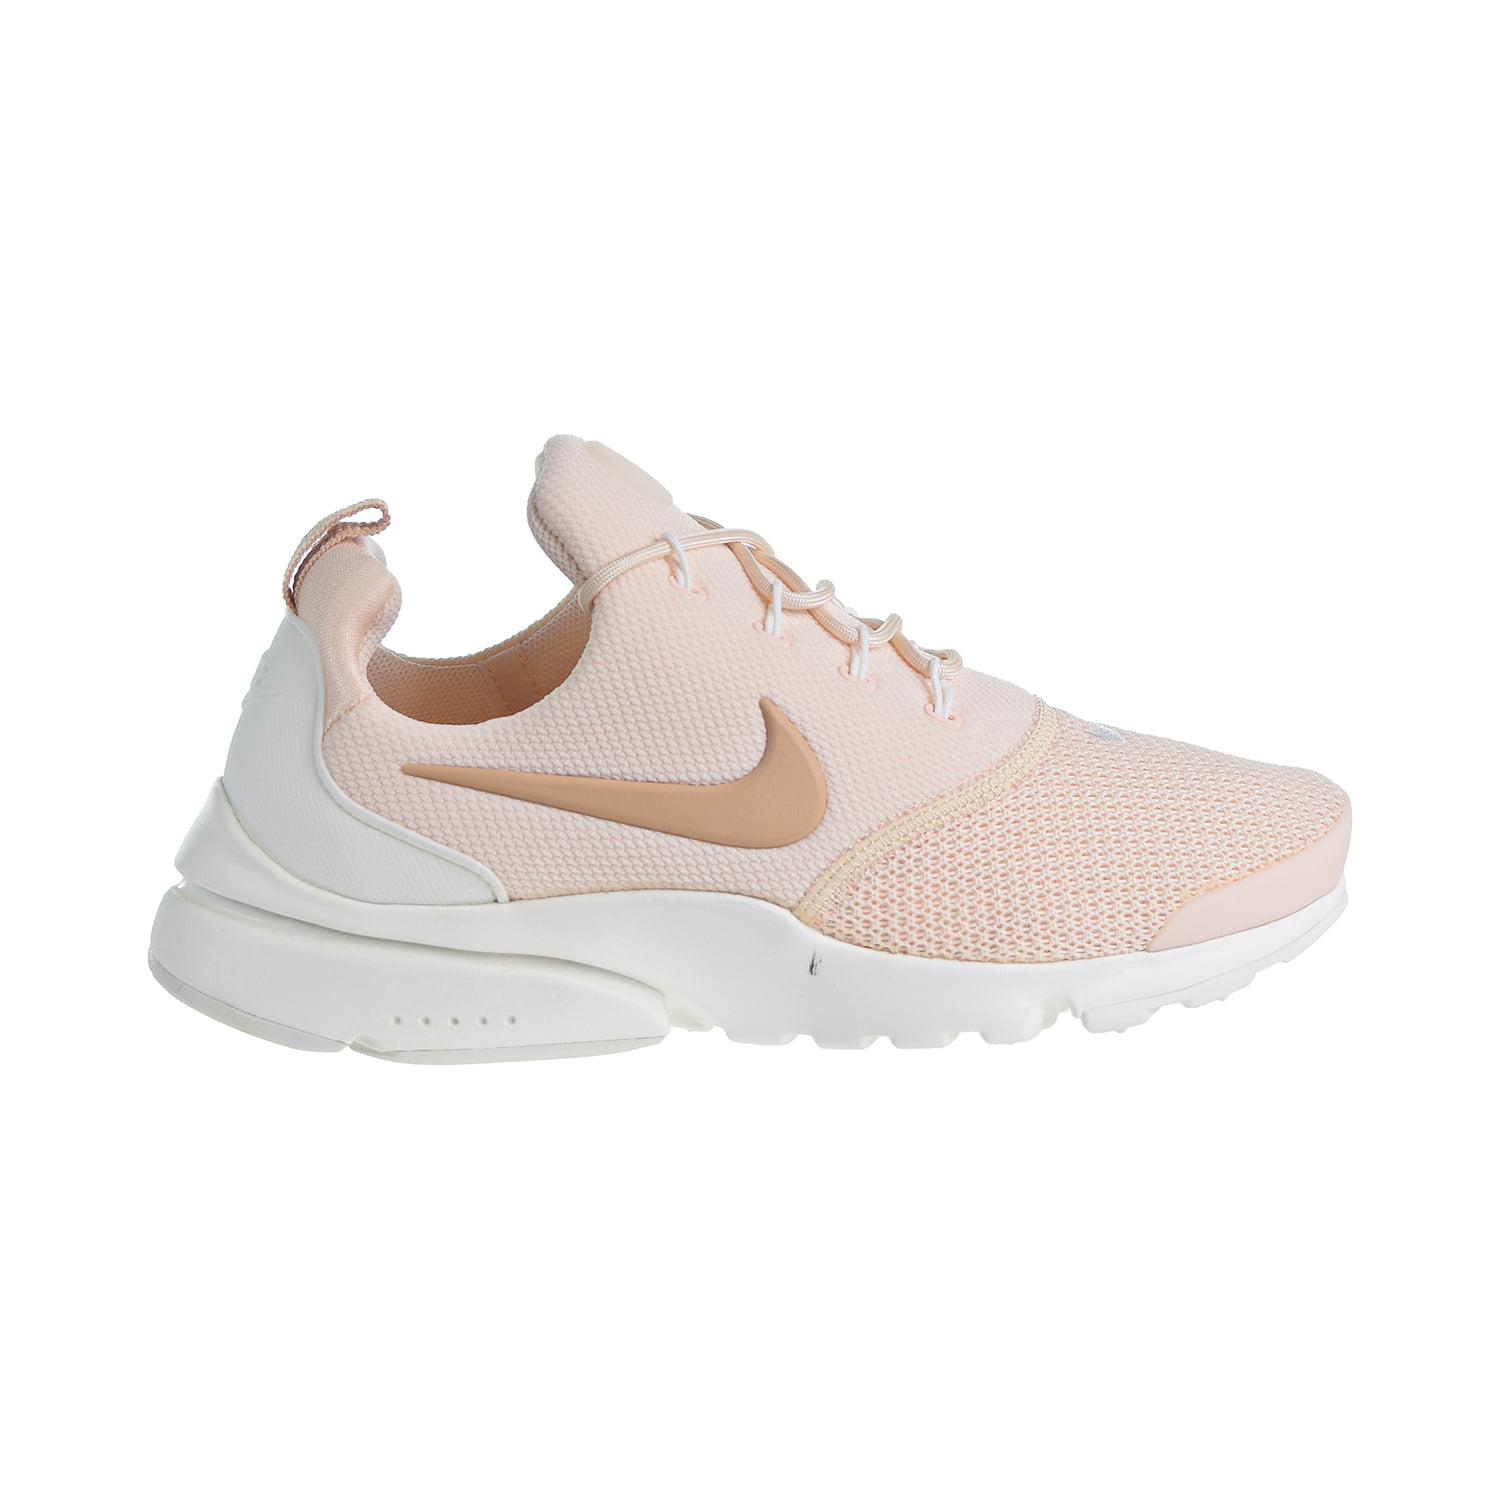 Nike Air Presto Fly Shoes Guava Beige -